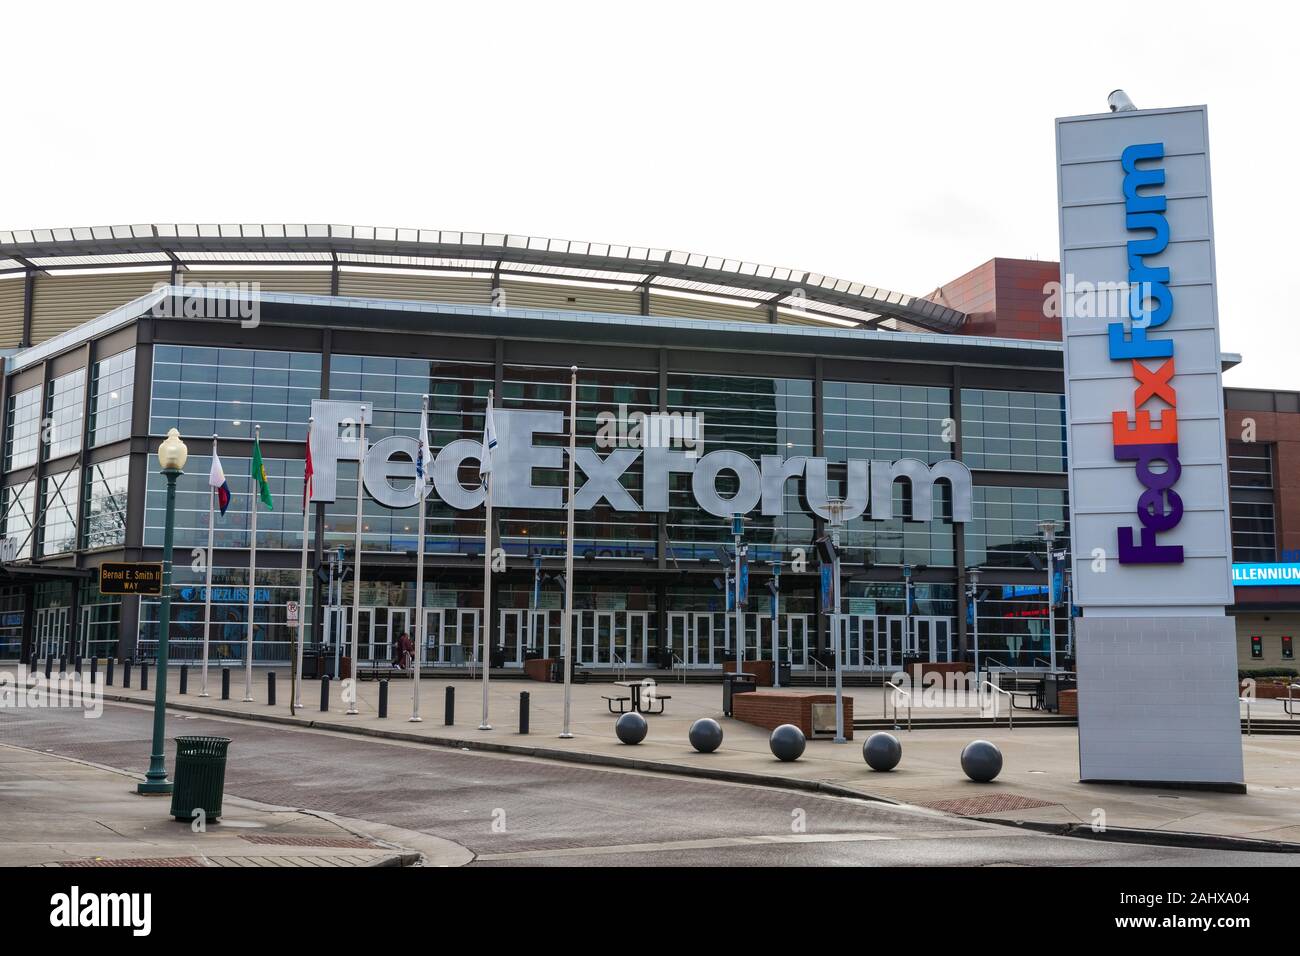 The Grizzlies Den at the FedEx Forum Editorial Stock Image - Image